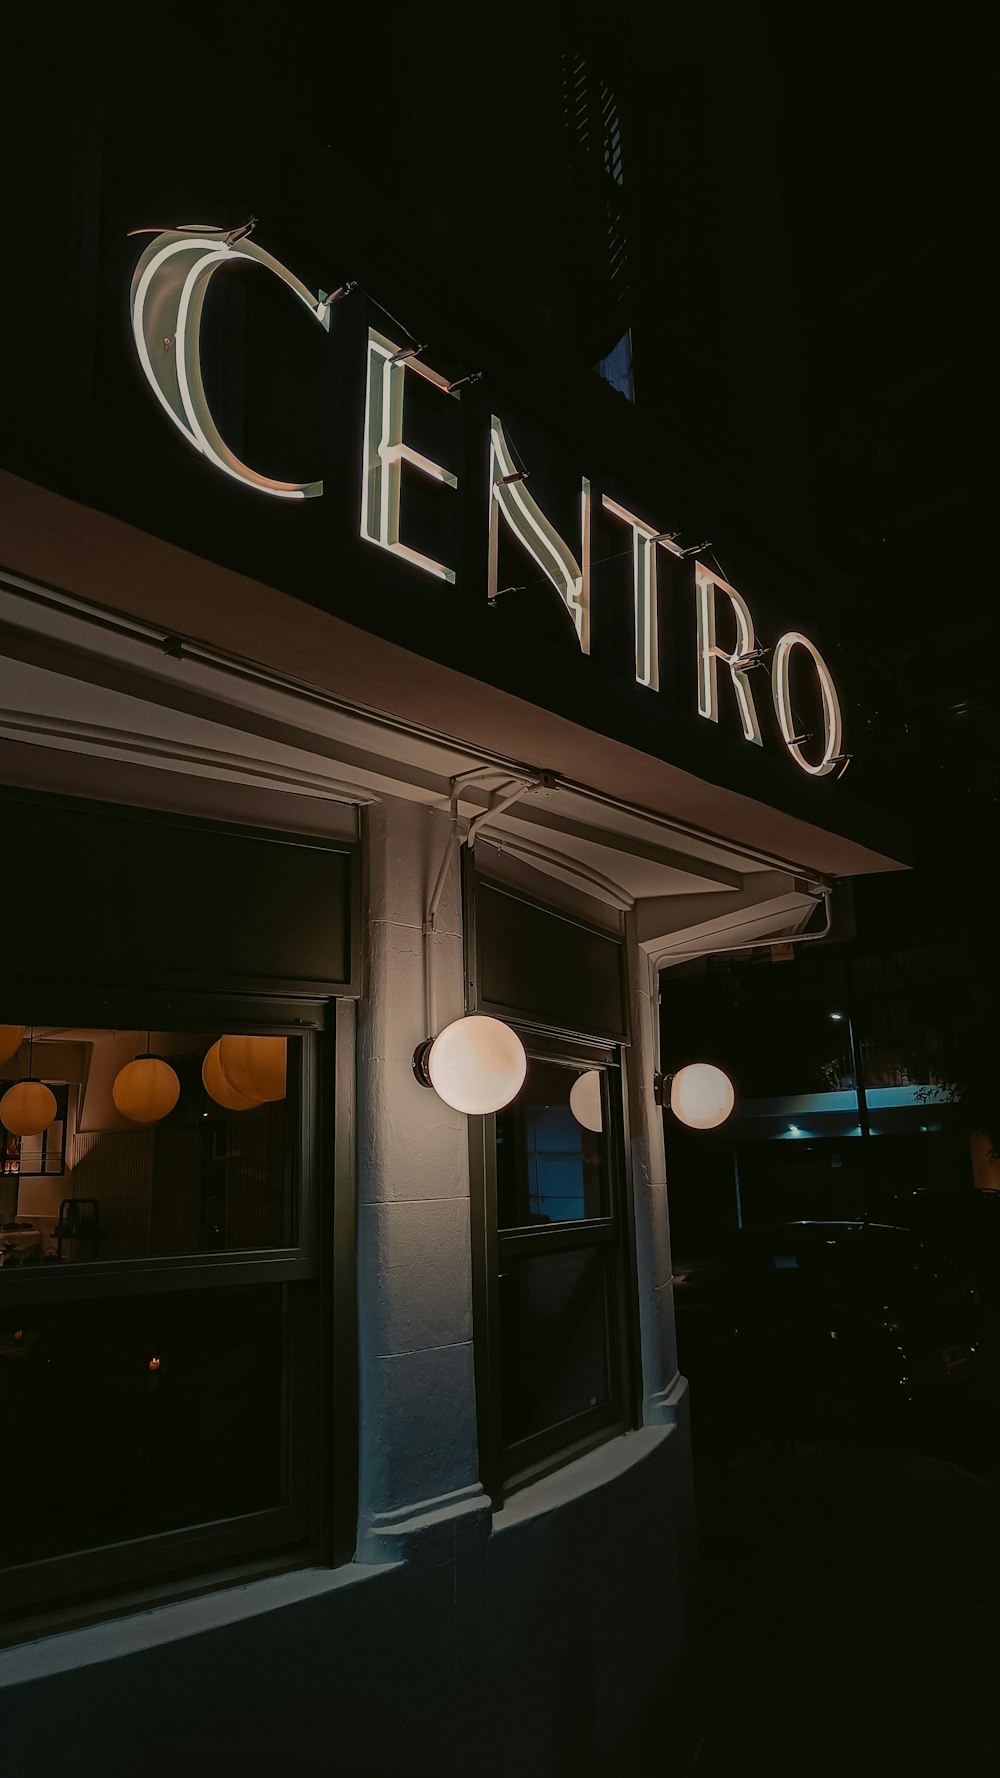 a building with a sign that says centro lit up at night